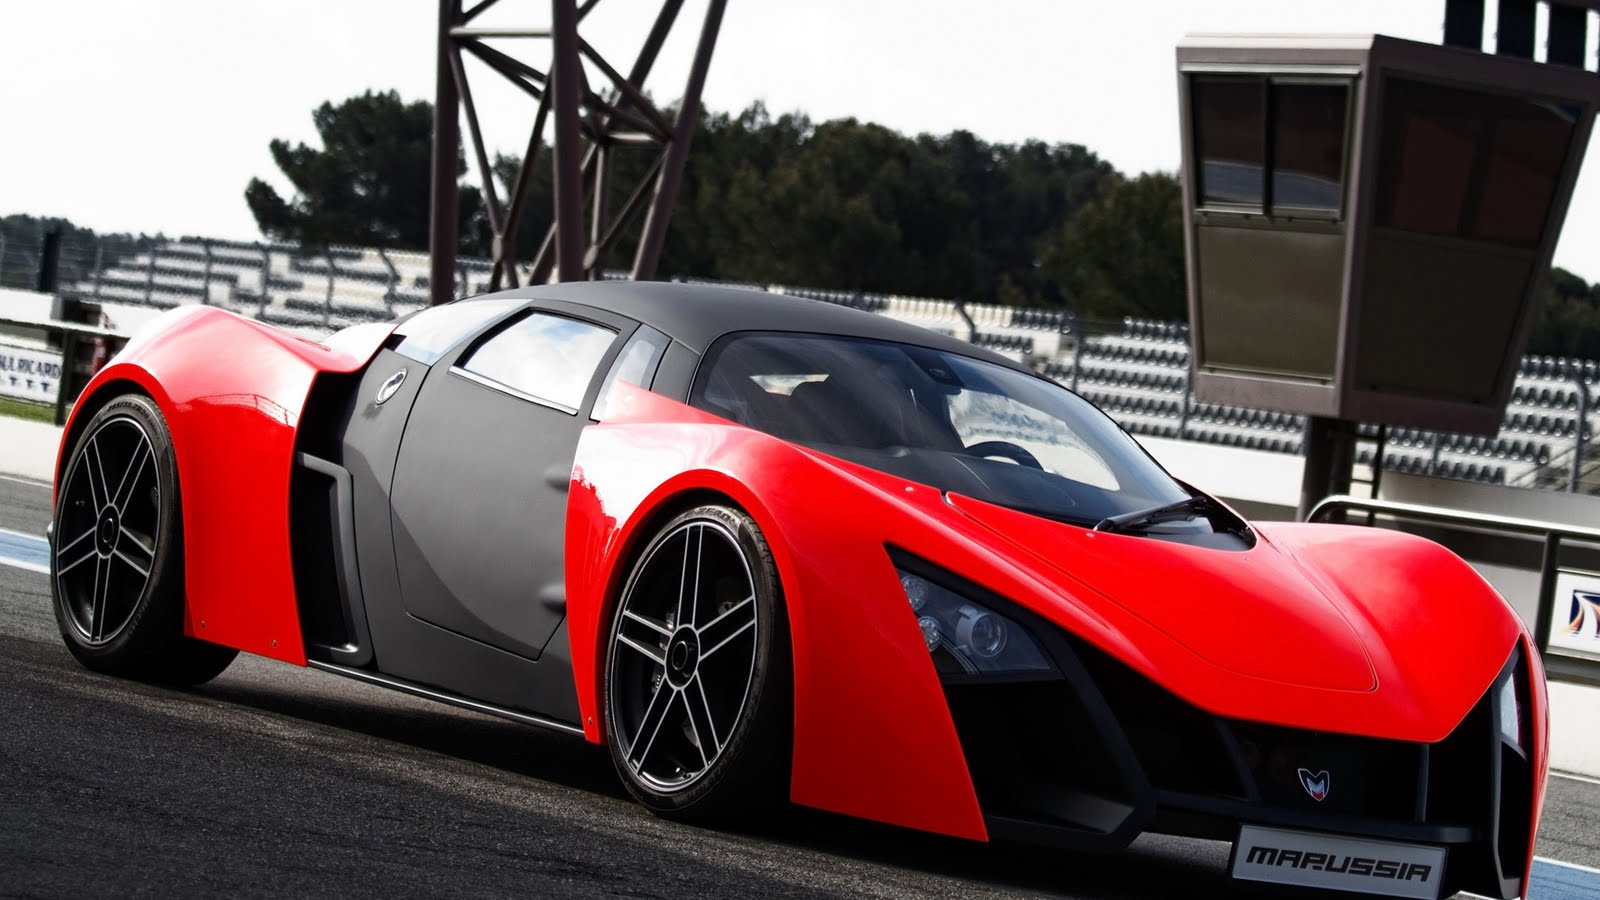 Super Cars 2013 HD Wallpapers | HD Wallpapers 360